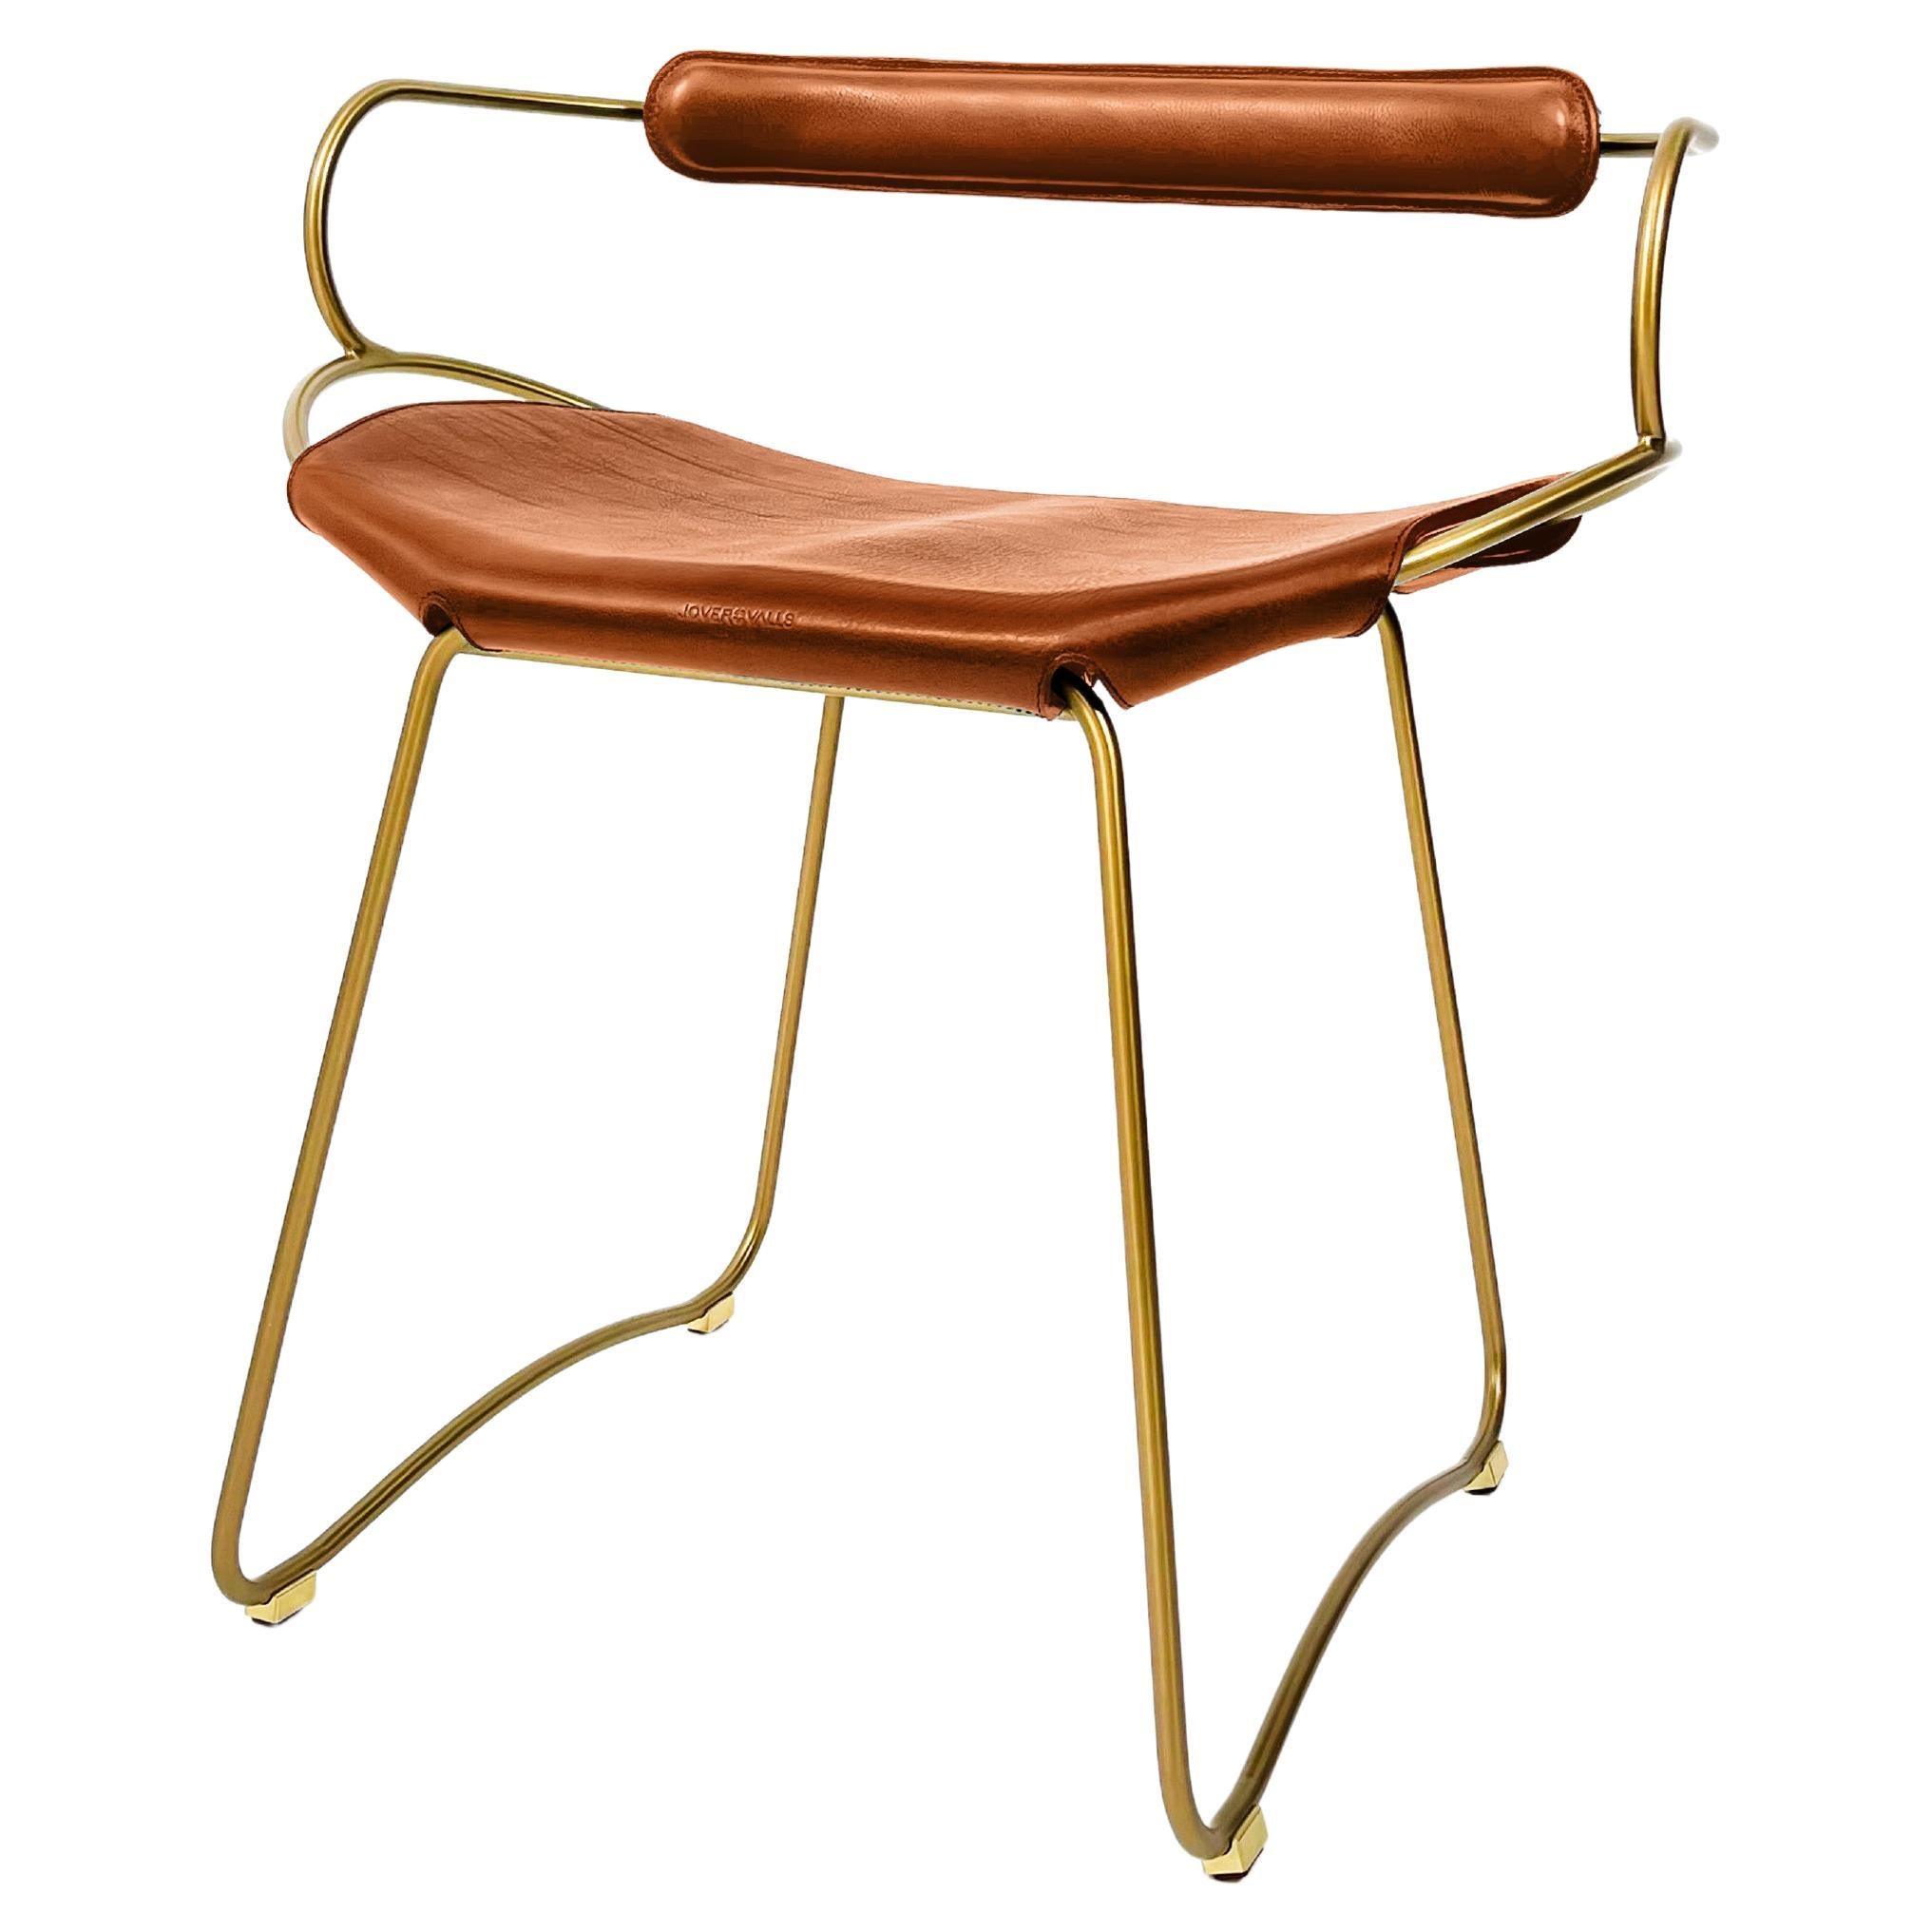 Table Bar Stool w. Backrest Aged Brass Metal & Natural Tan Leather